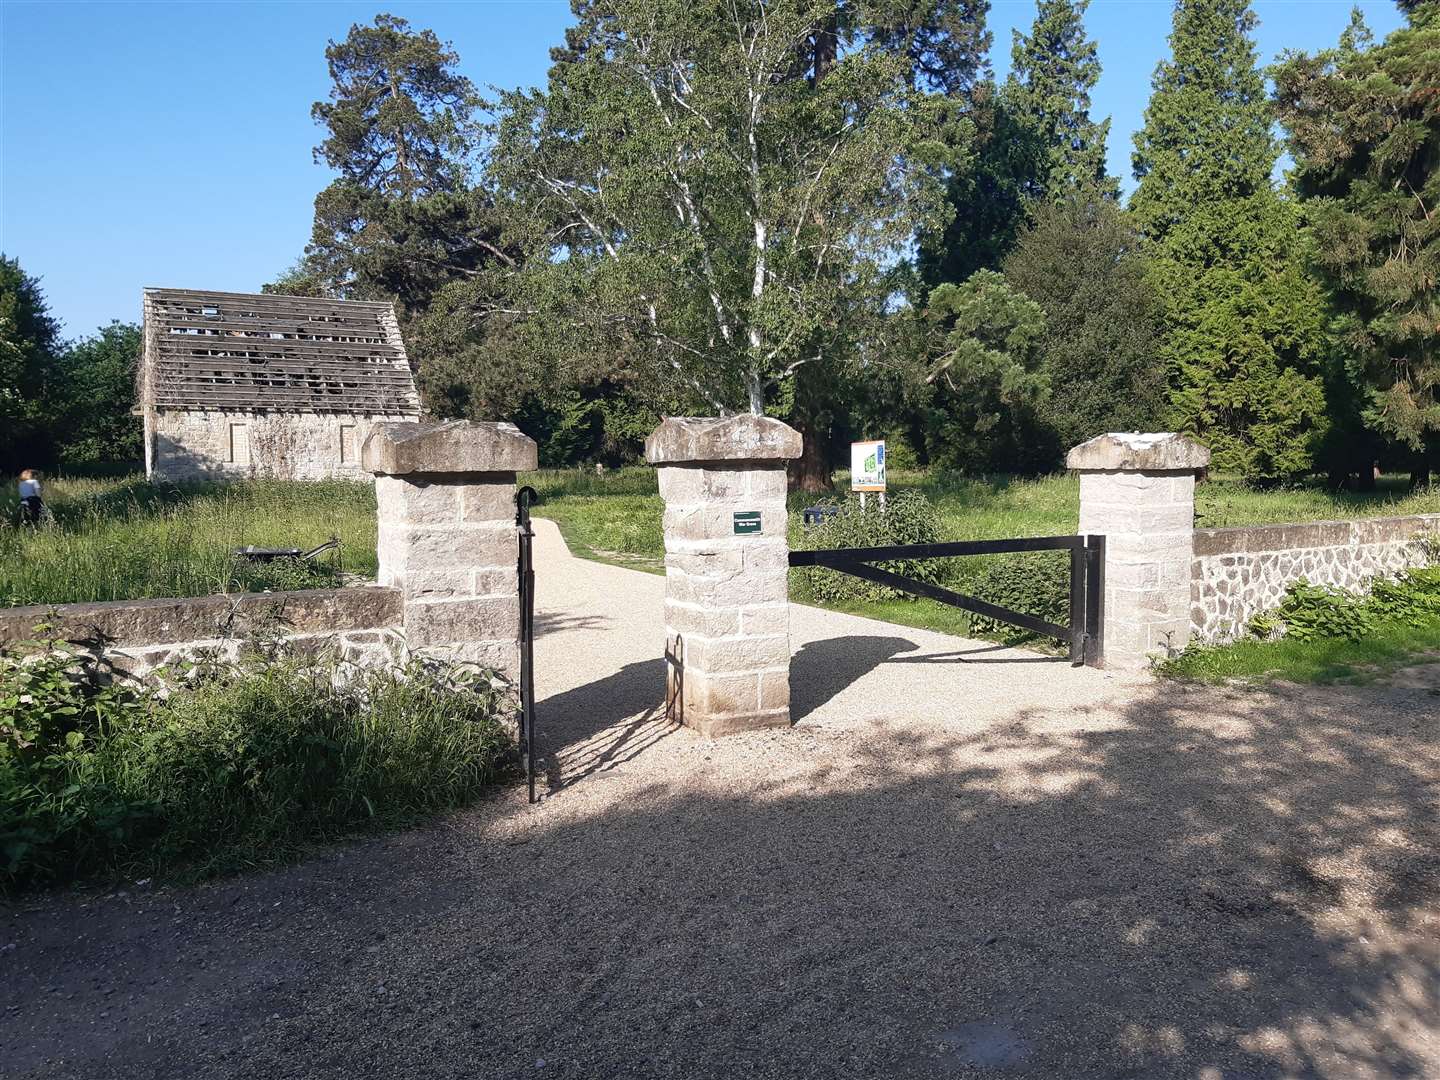 The main entrance to Oakwood Cemetery with the derelict chapel visible in the background